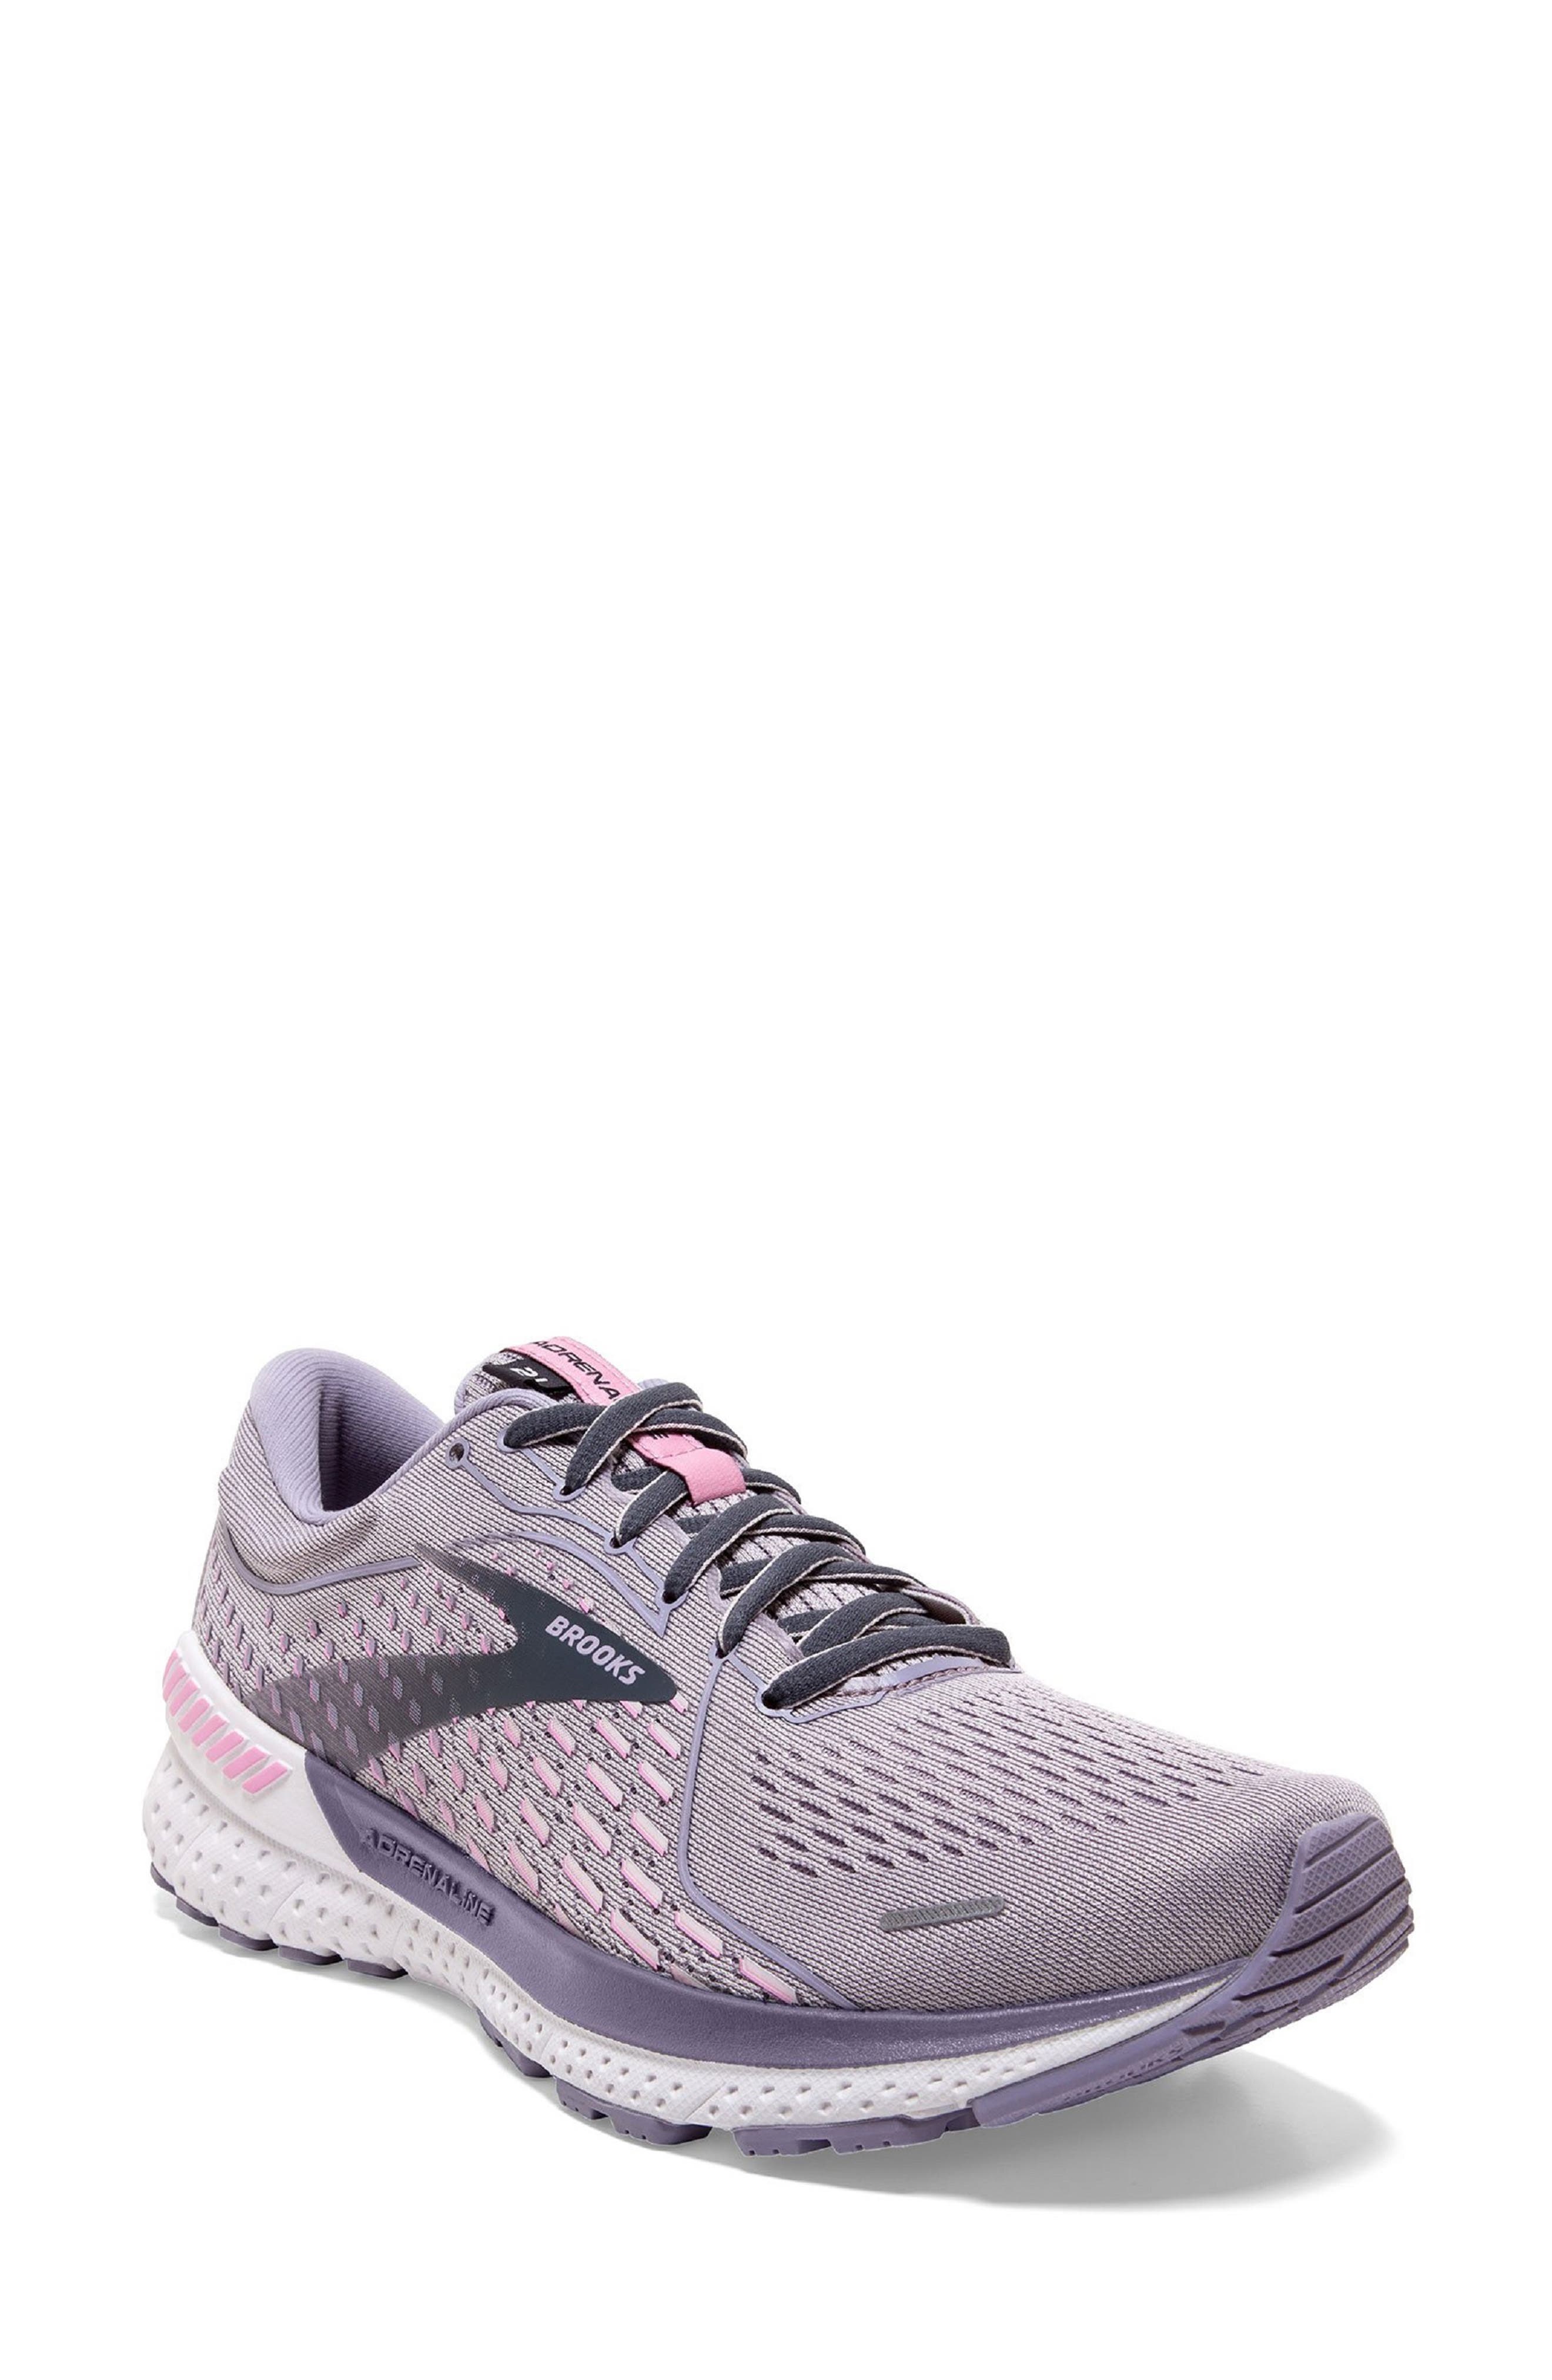 B + Free Aus Delivery Brooks Glycerin 12 Womens Runner 697